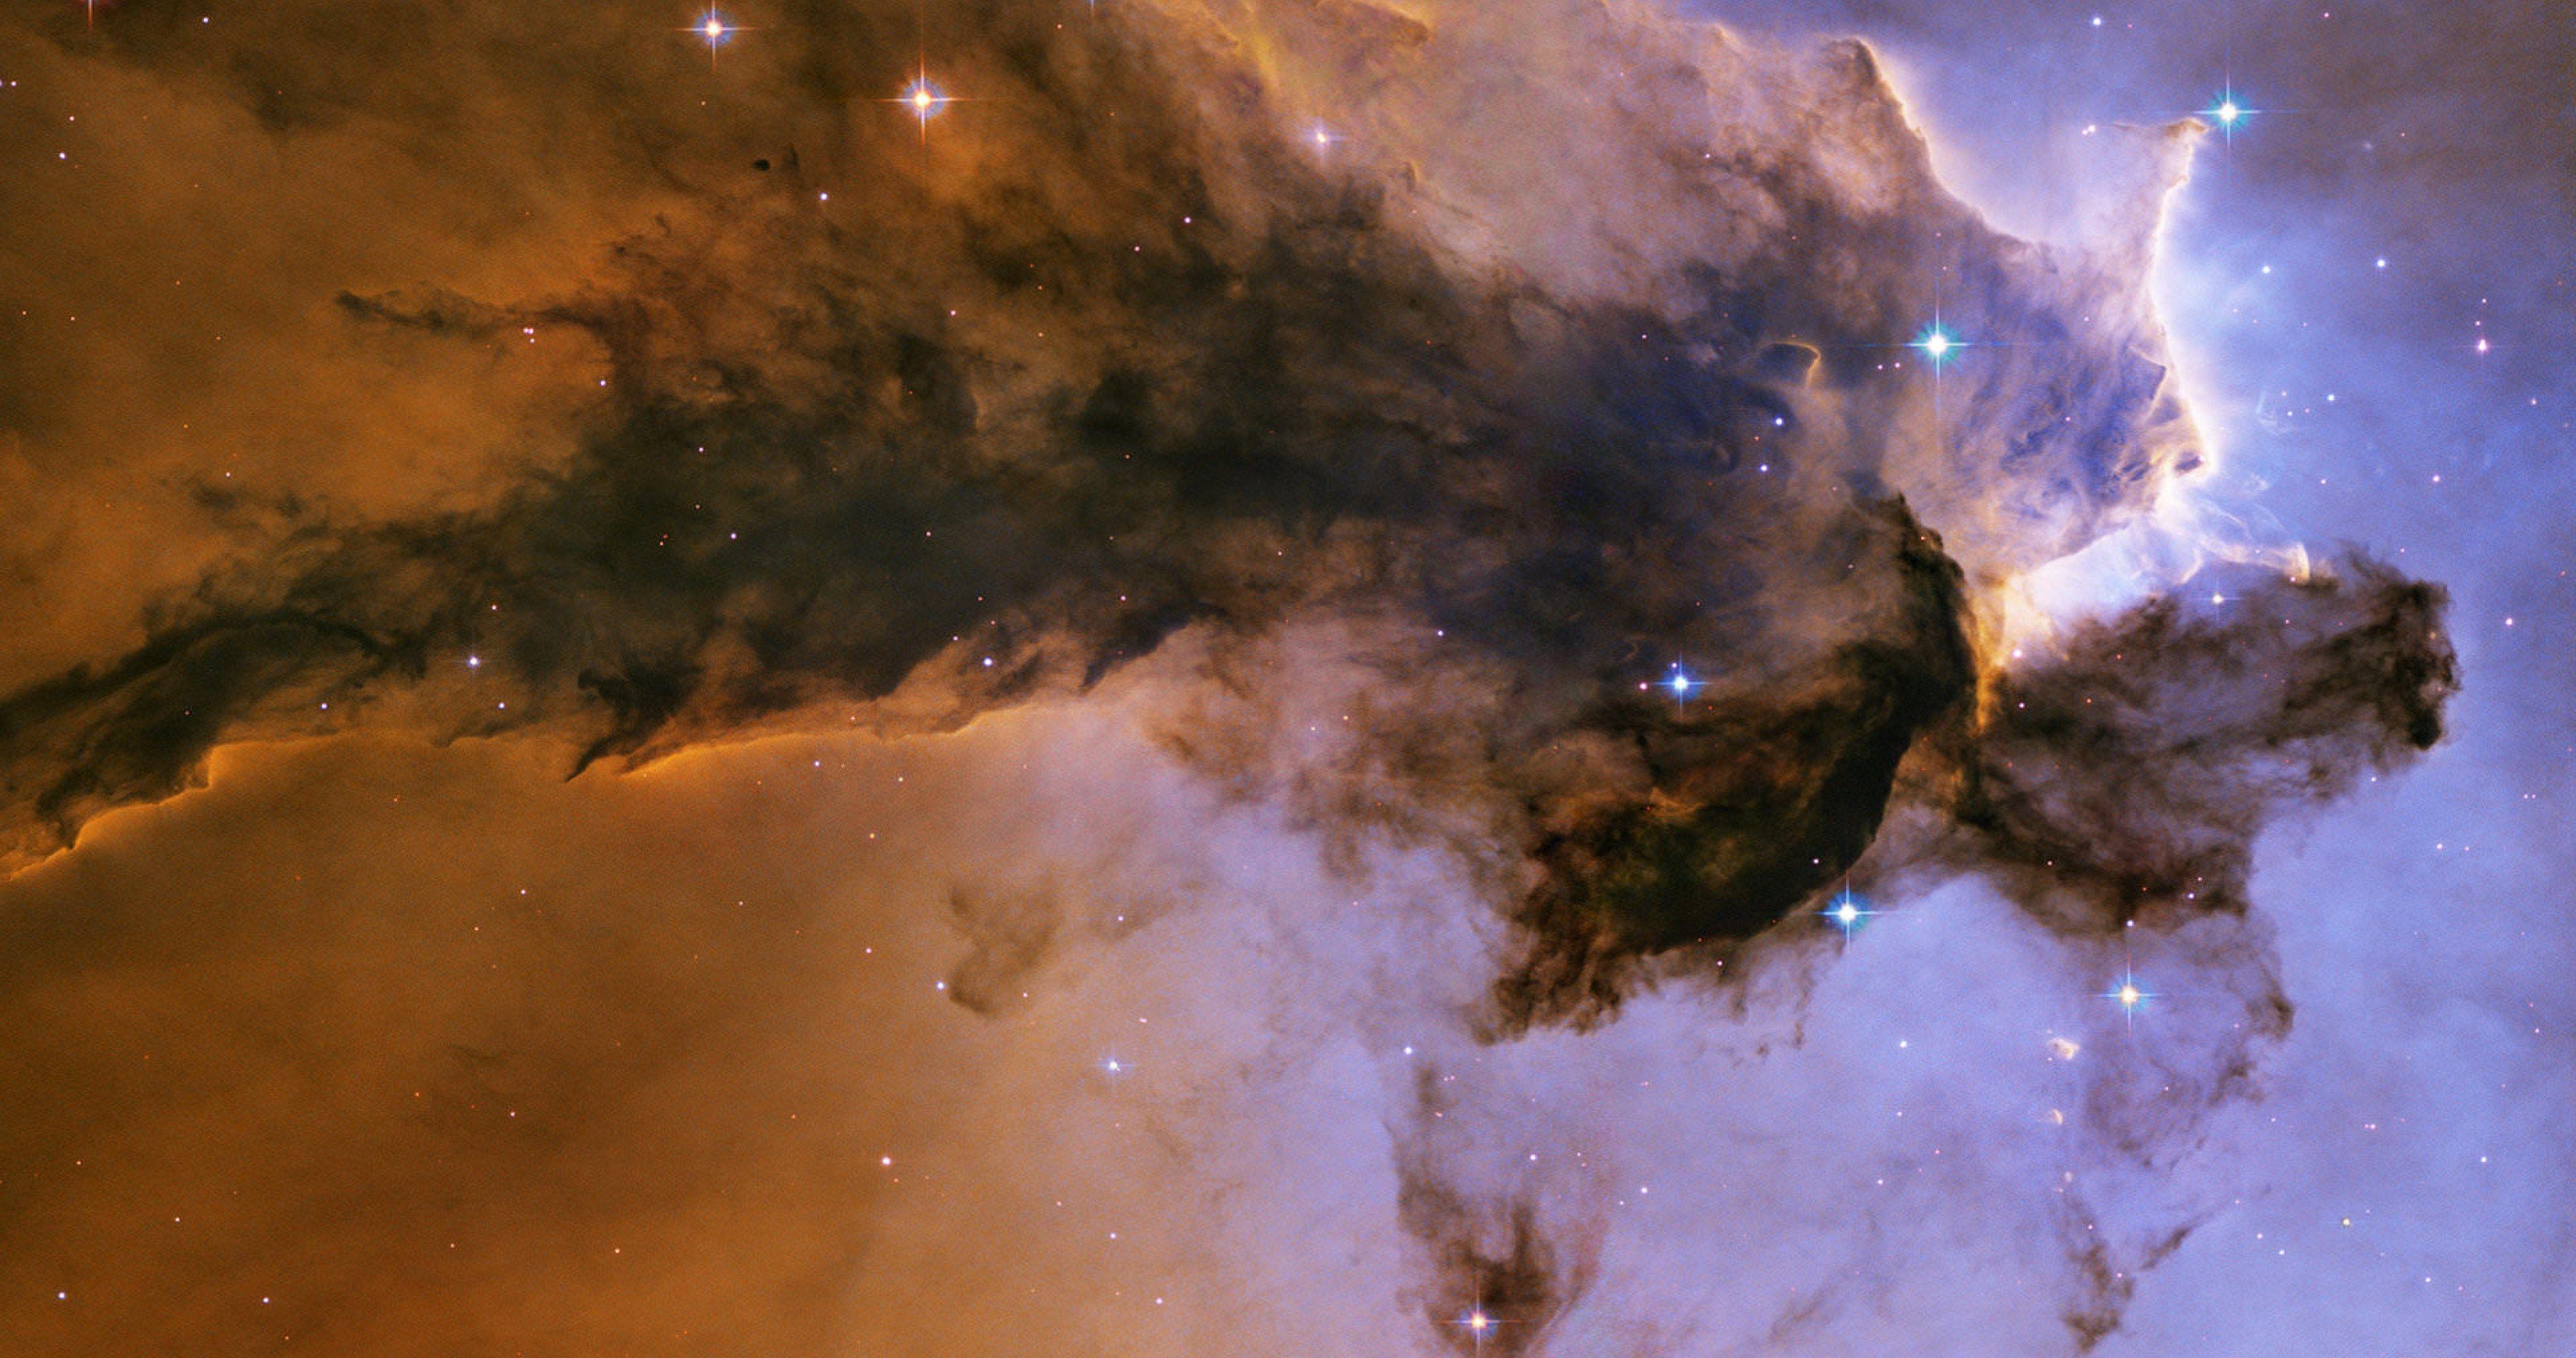 ultra hd hubble space telescope images